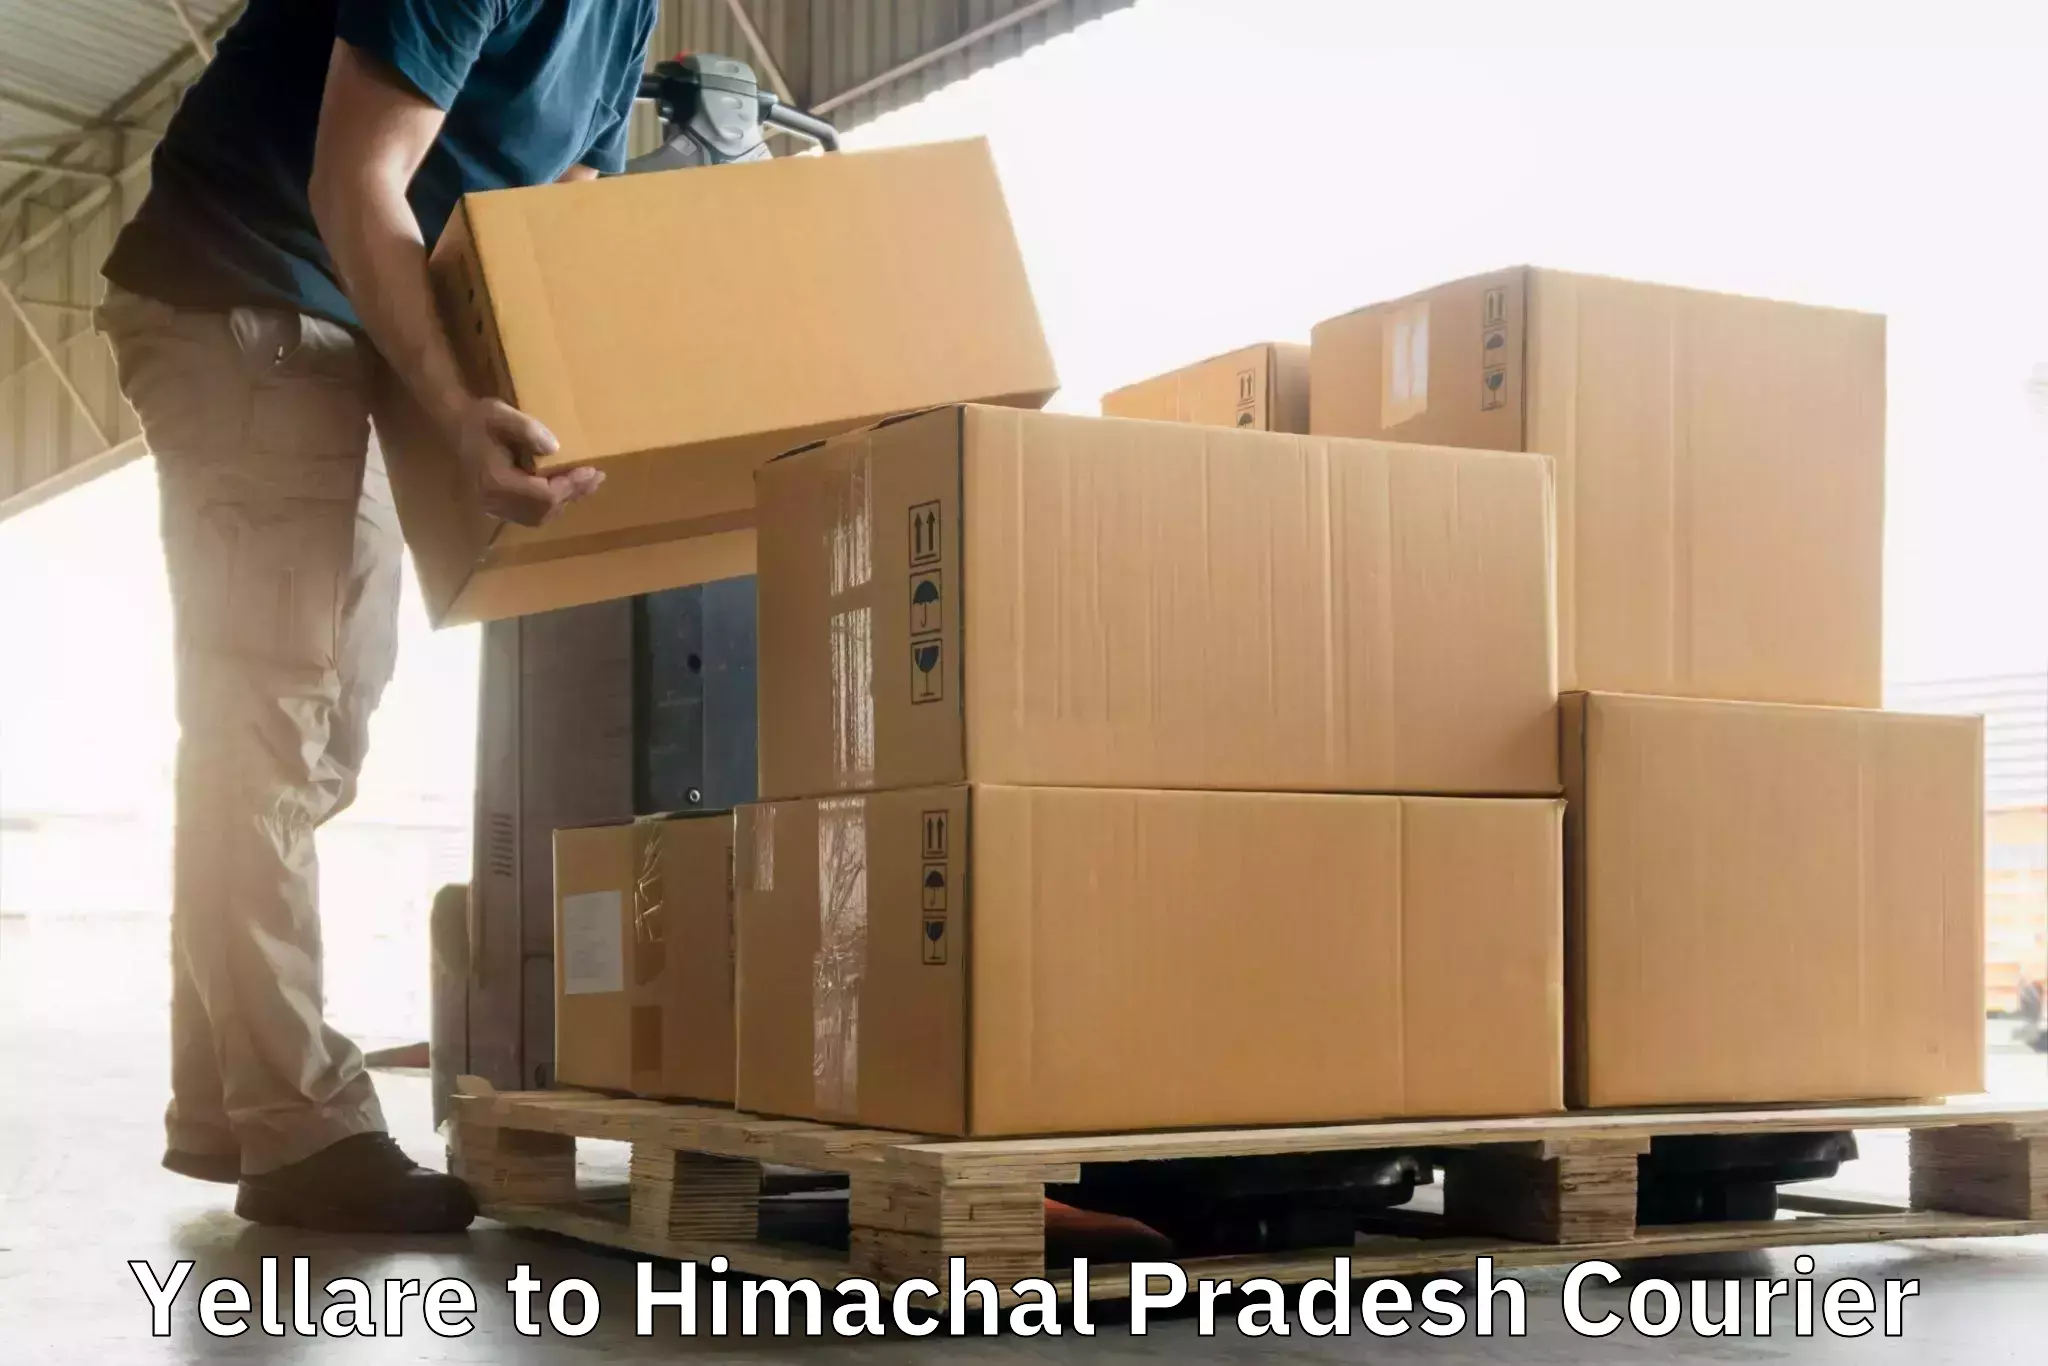 Full-service courier options Yellare to Himachal Pradesh